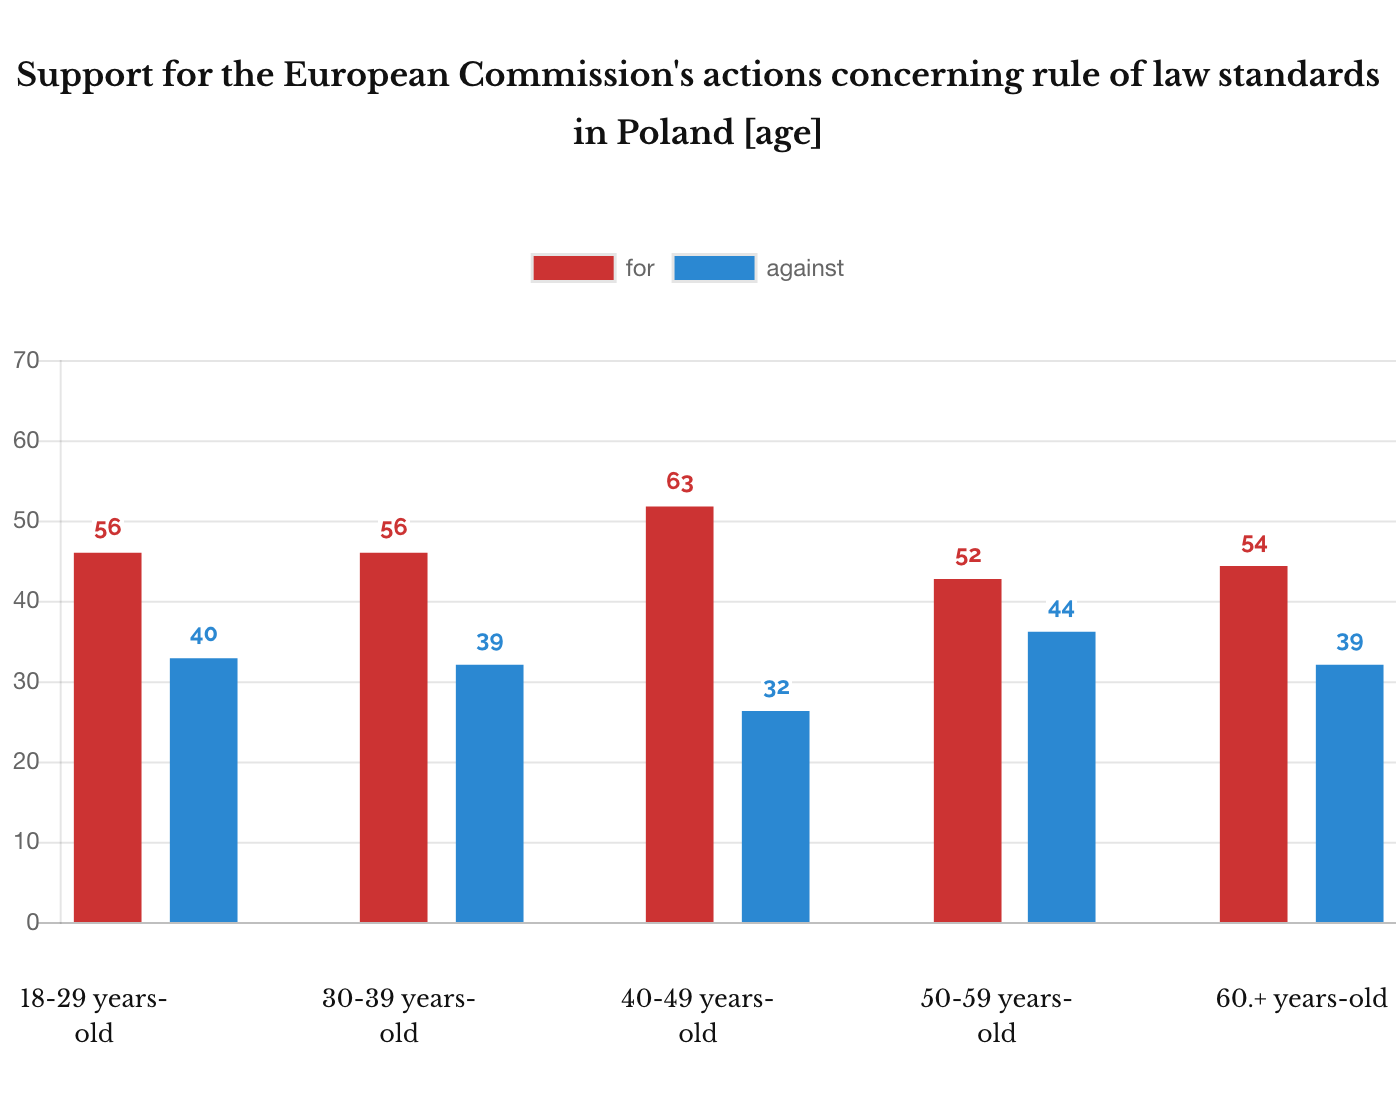 IPSOS December 2018. Support for the European Commission's action concerning rule of law in Poland [age]